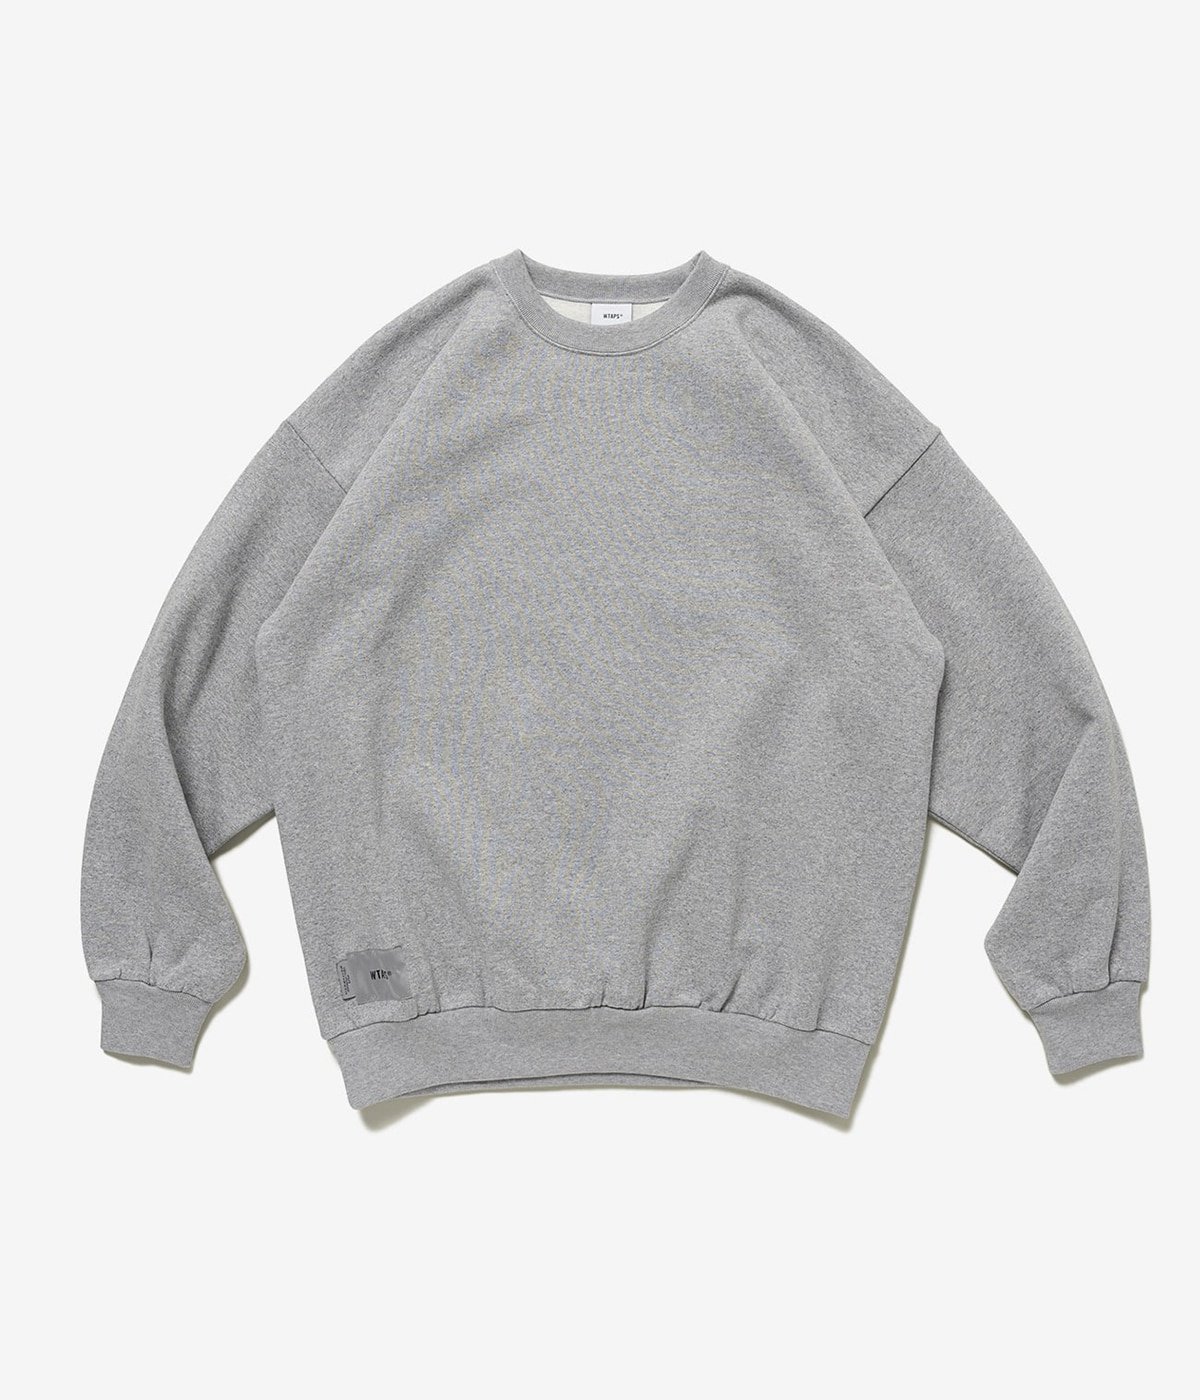 FORTLESS / SWEATER / COTTON | WTAPS(ダブルタップス) / トップス 